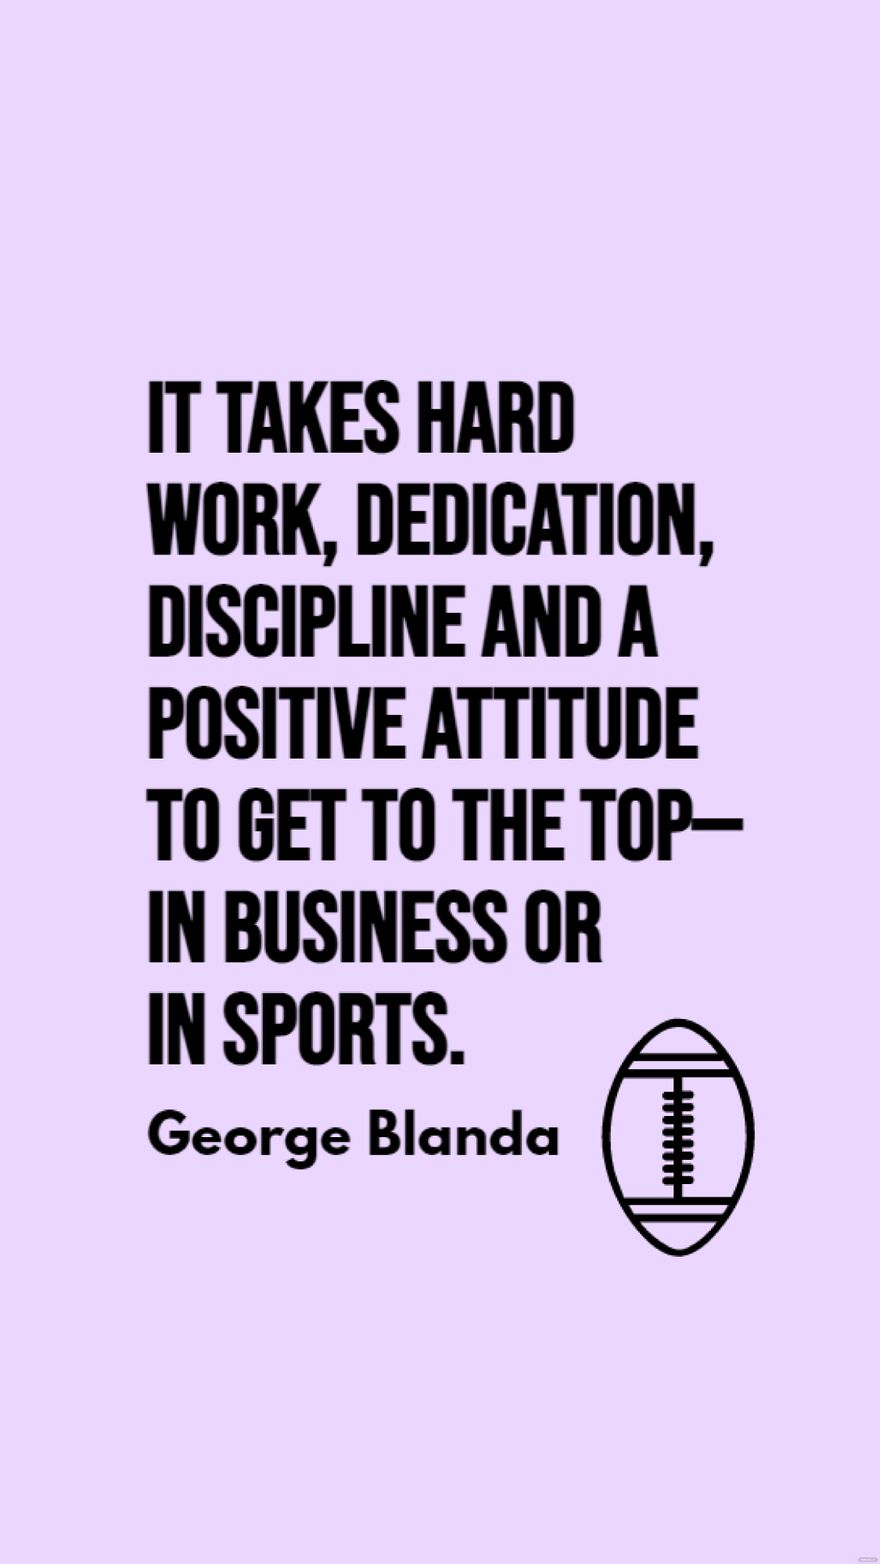 George Blanda - It takes hard work, dedication, discipline and a positive attitude to get to the top - in business or in sports.